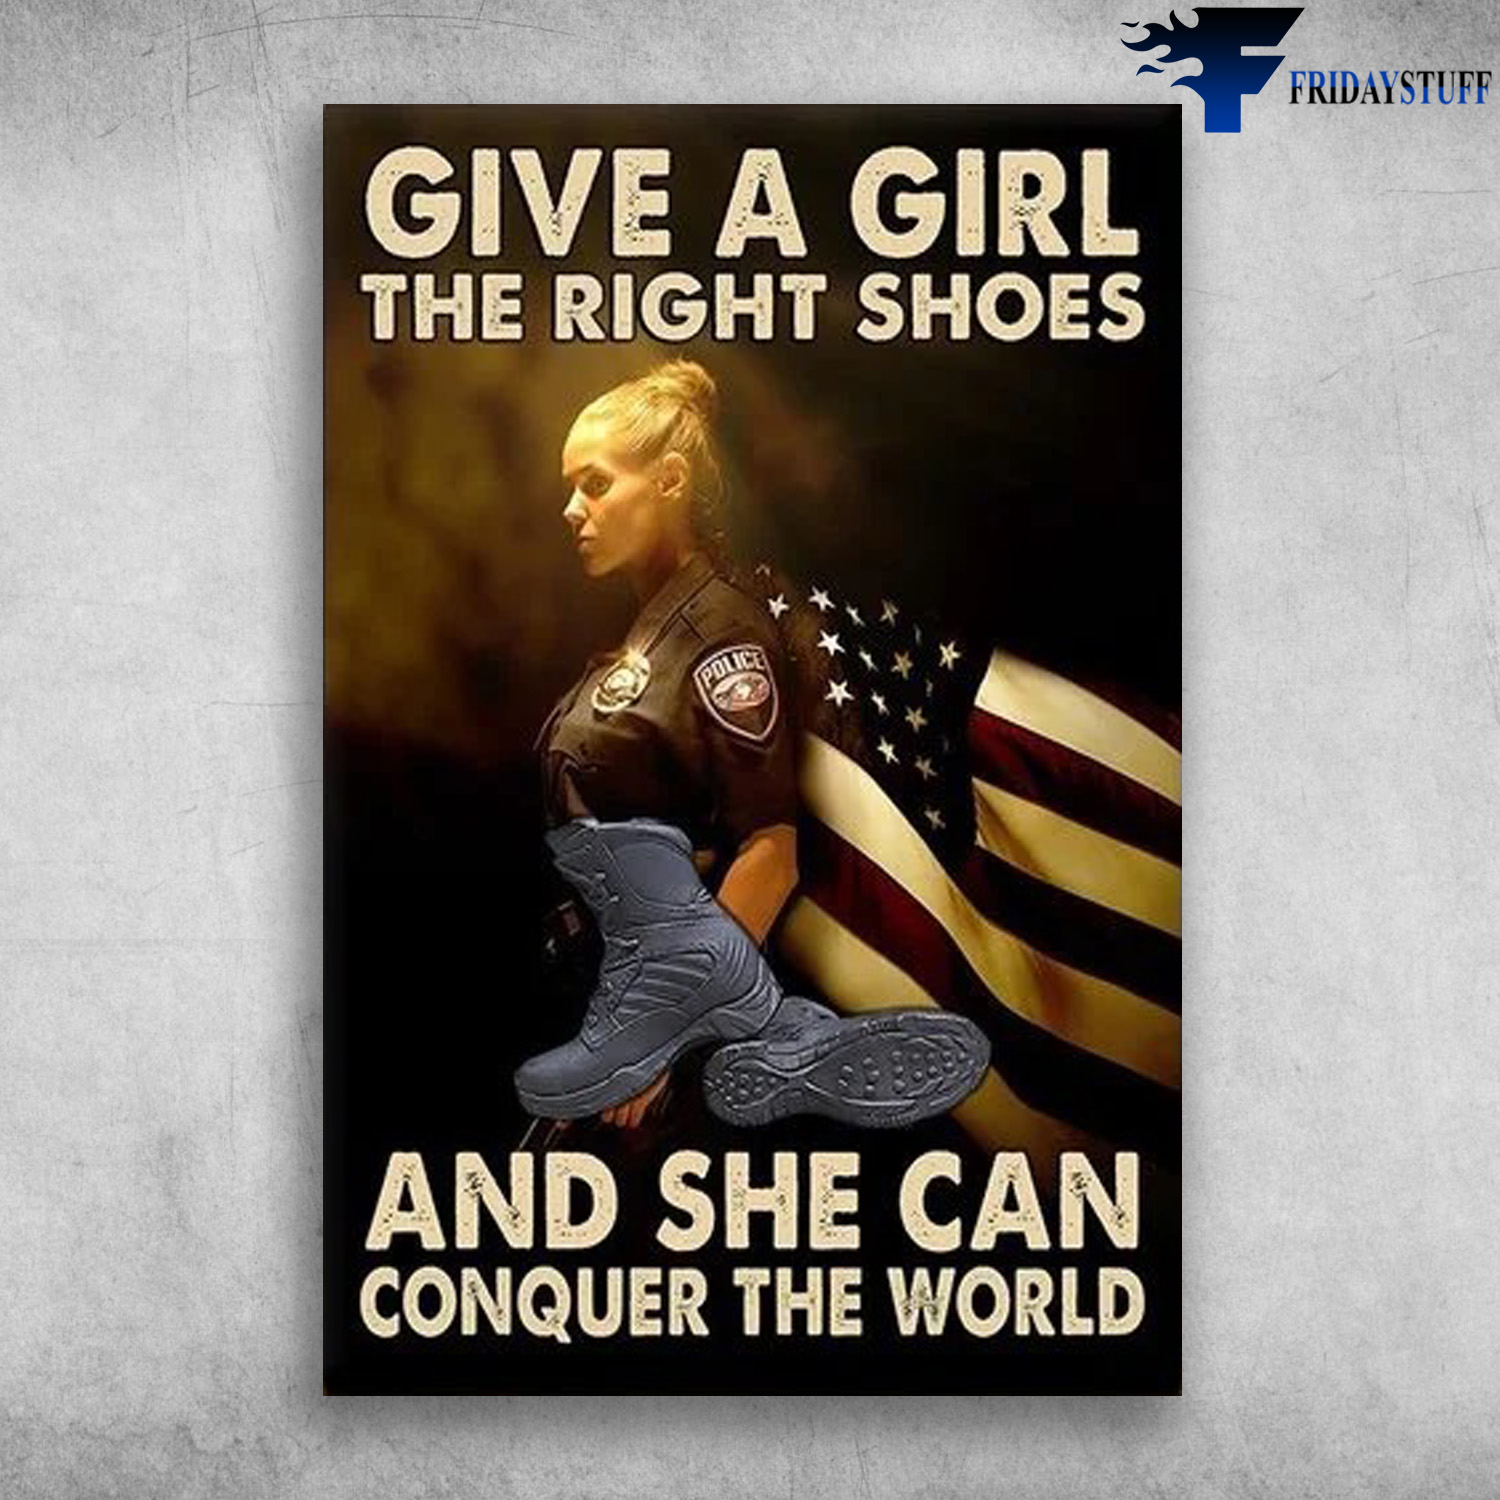 American Police - Give A Girl The Right Shoes, And She Can Conquer The World